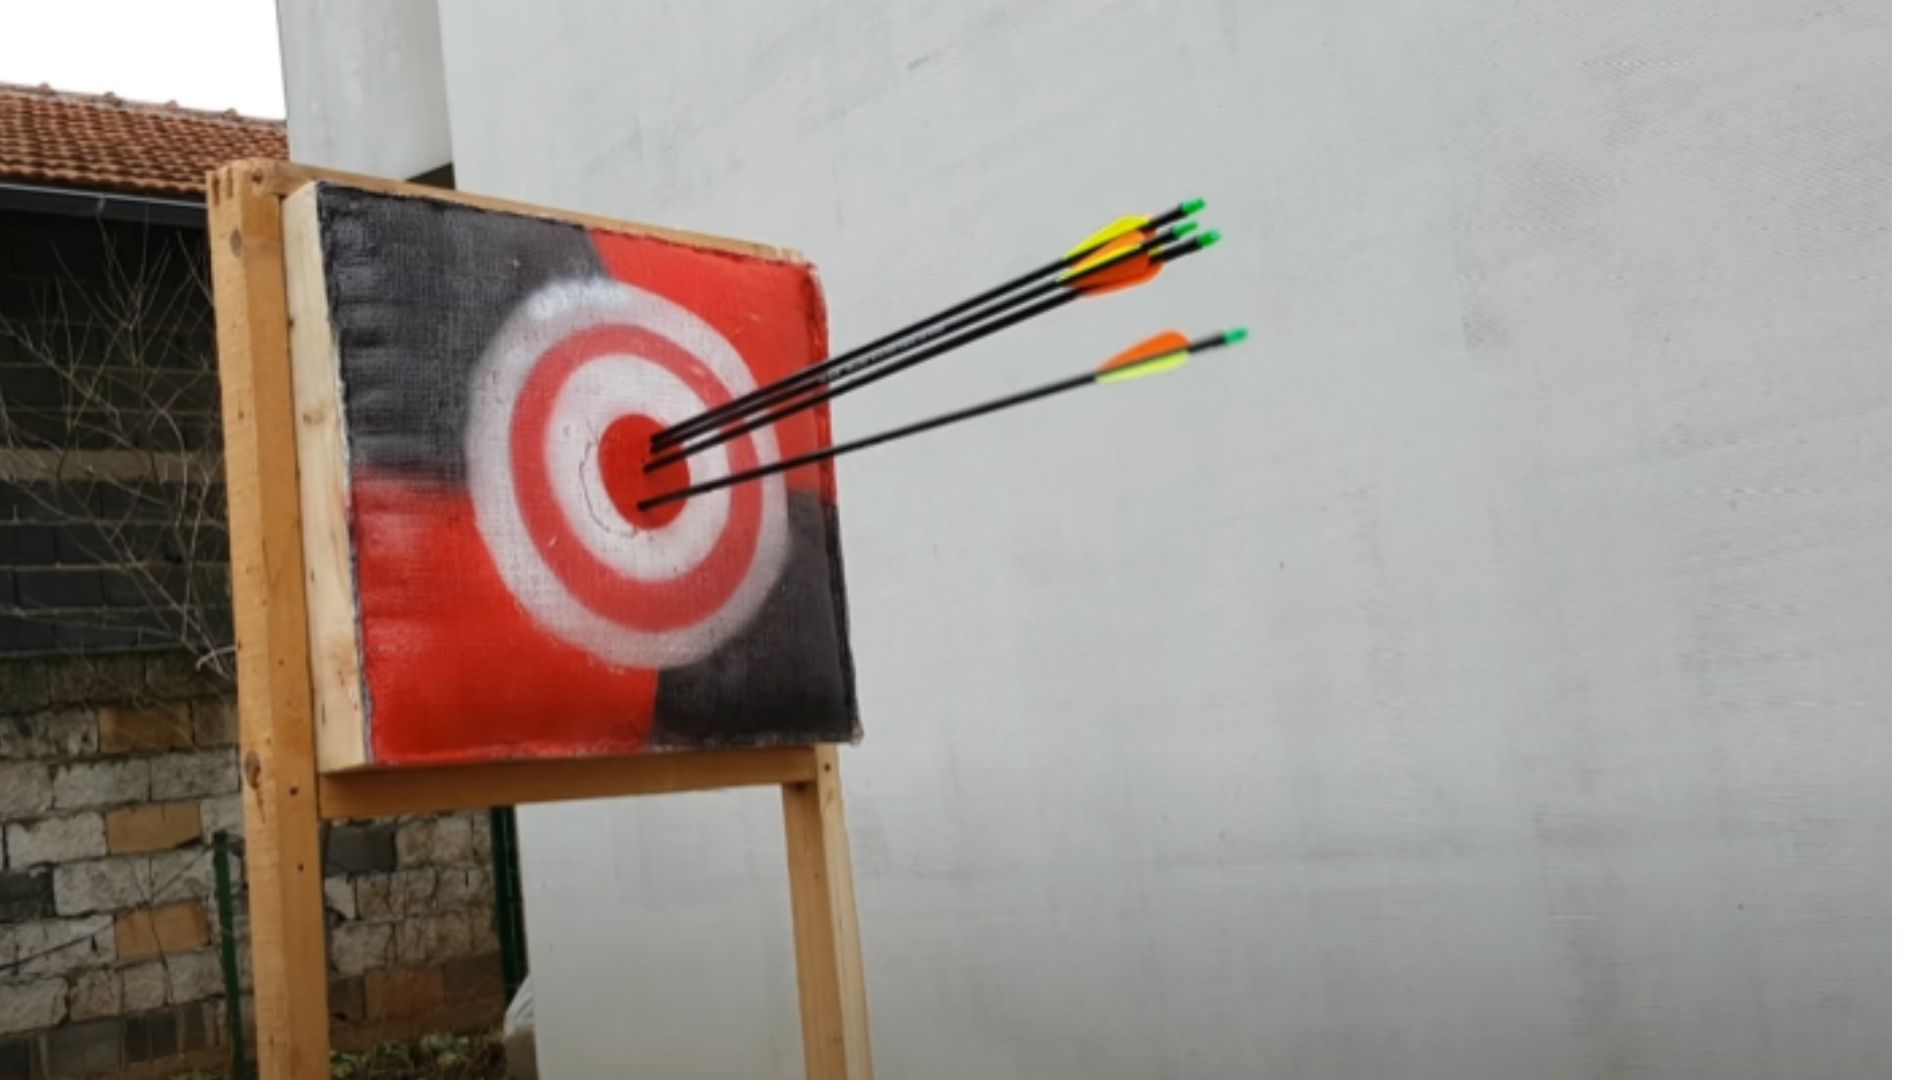 What are Archery Targets Made of